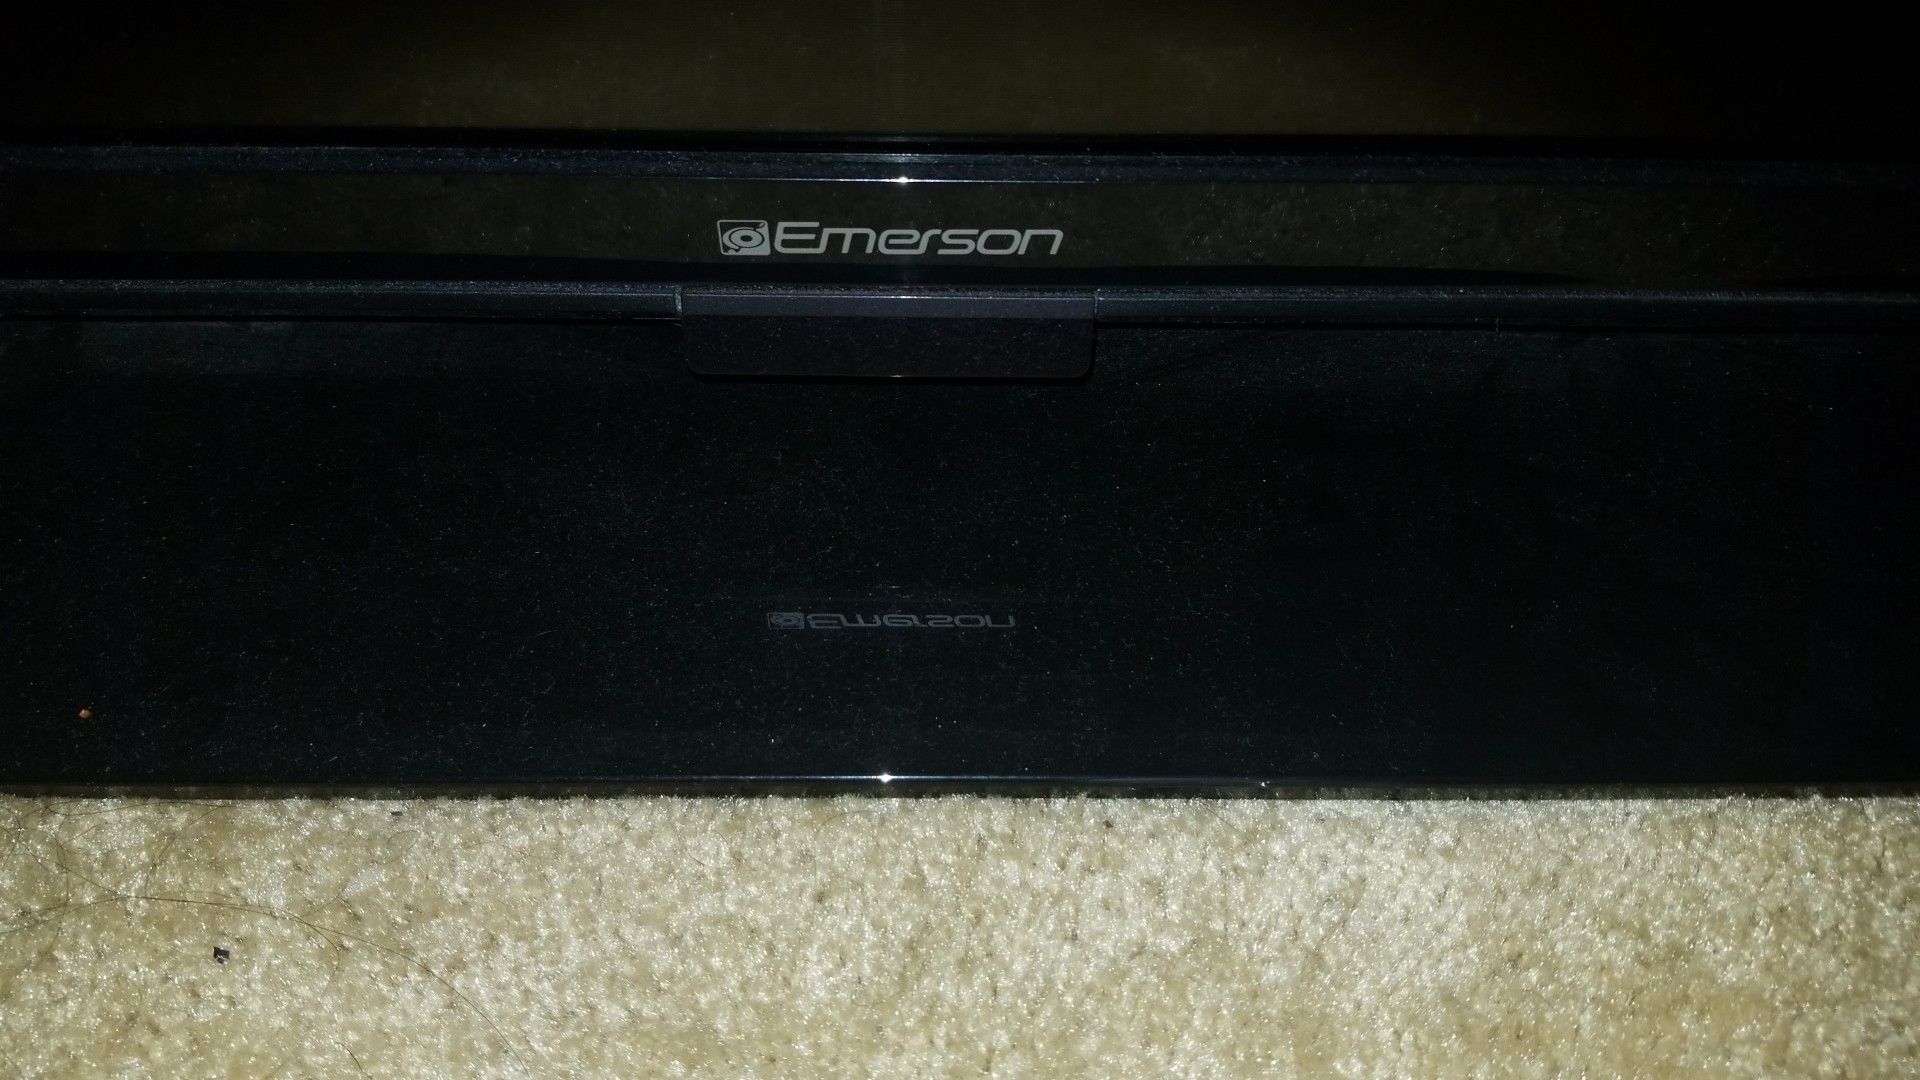 Emerson 55 inch flat screen tv. Mint condition. Moving out of state. Must sell. Great condition and almost new.